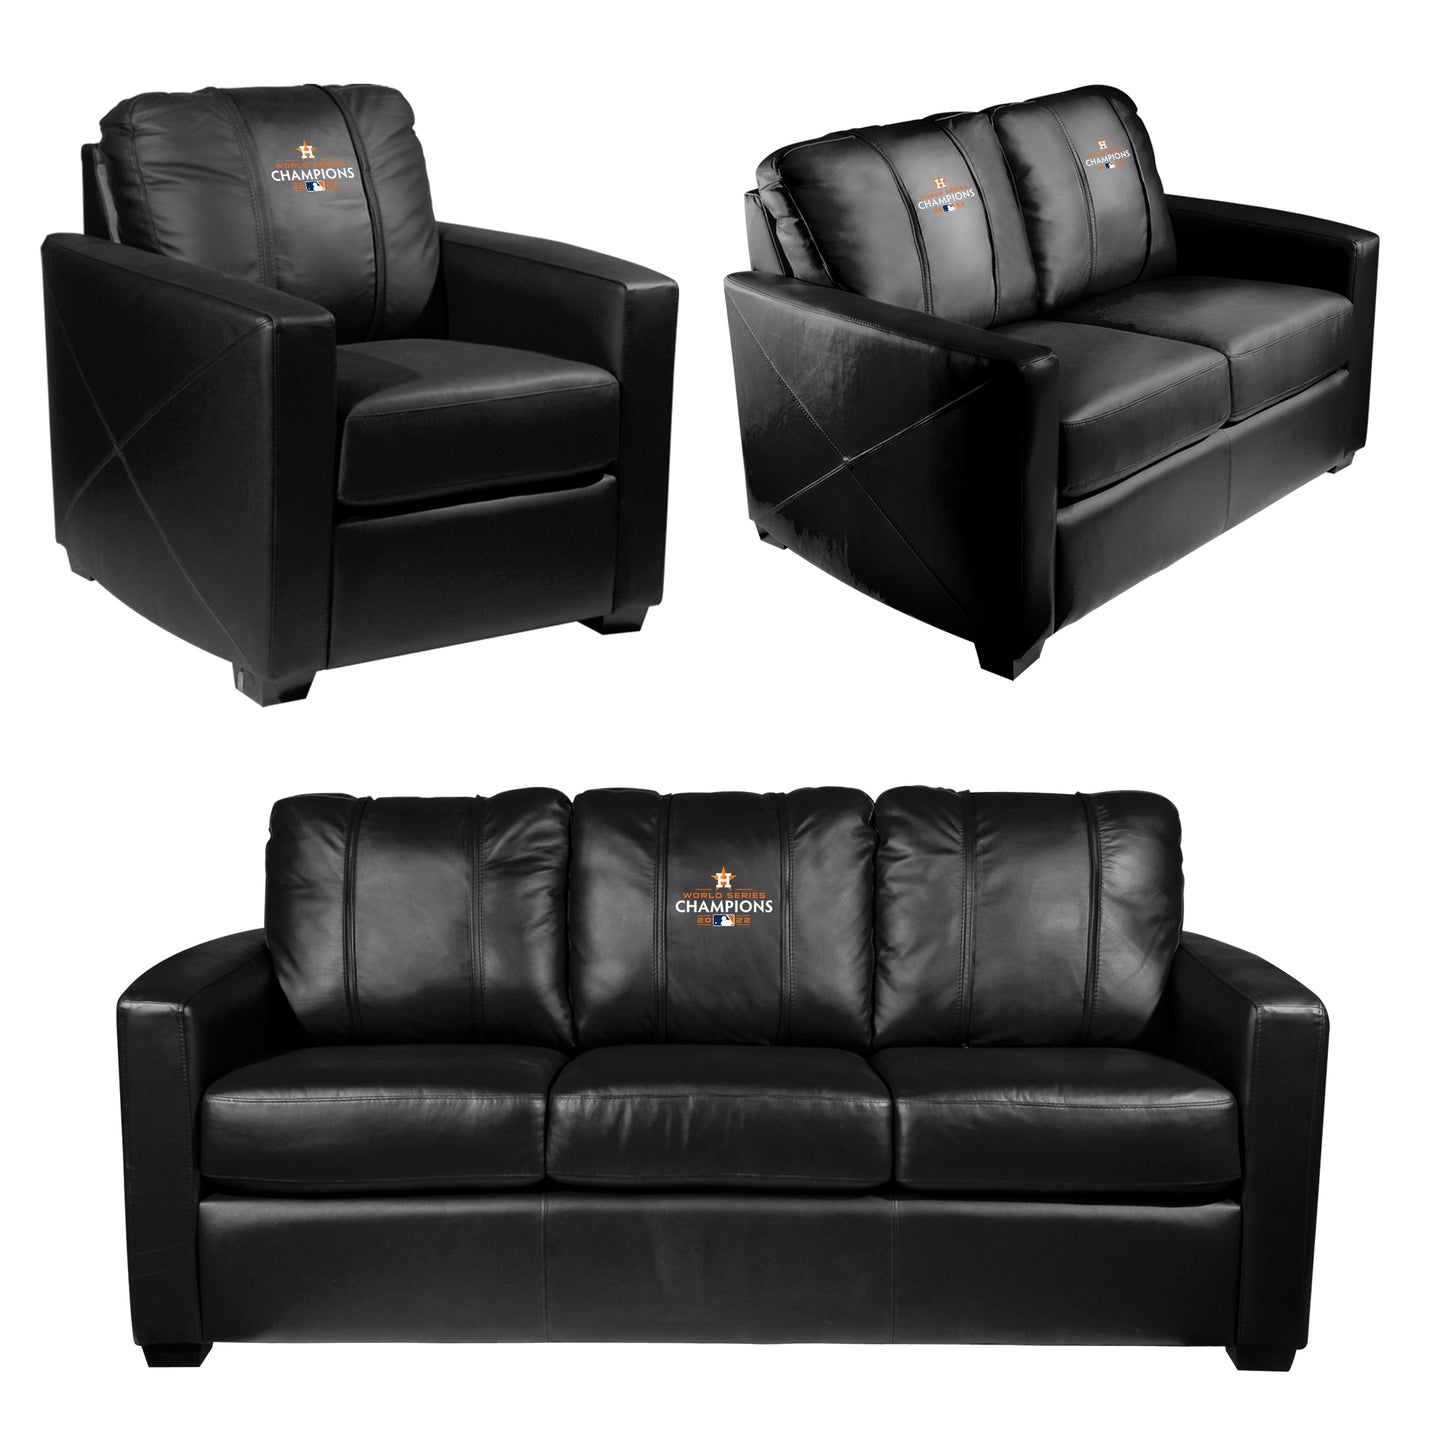 Silver Loveseat with Houston Astros 2022 Champions